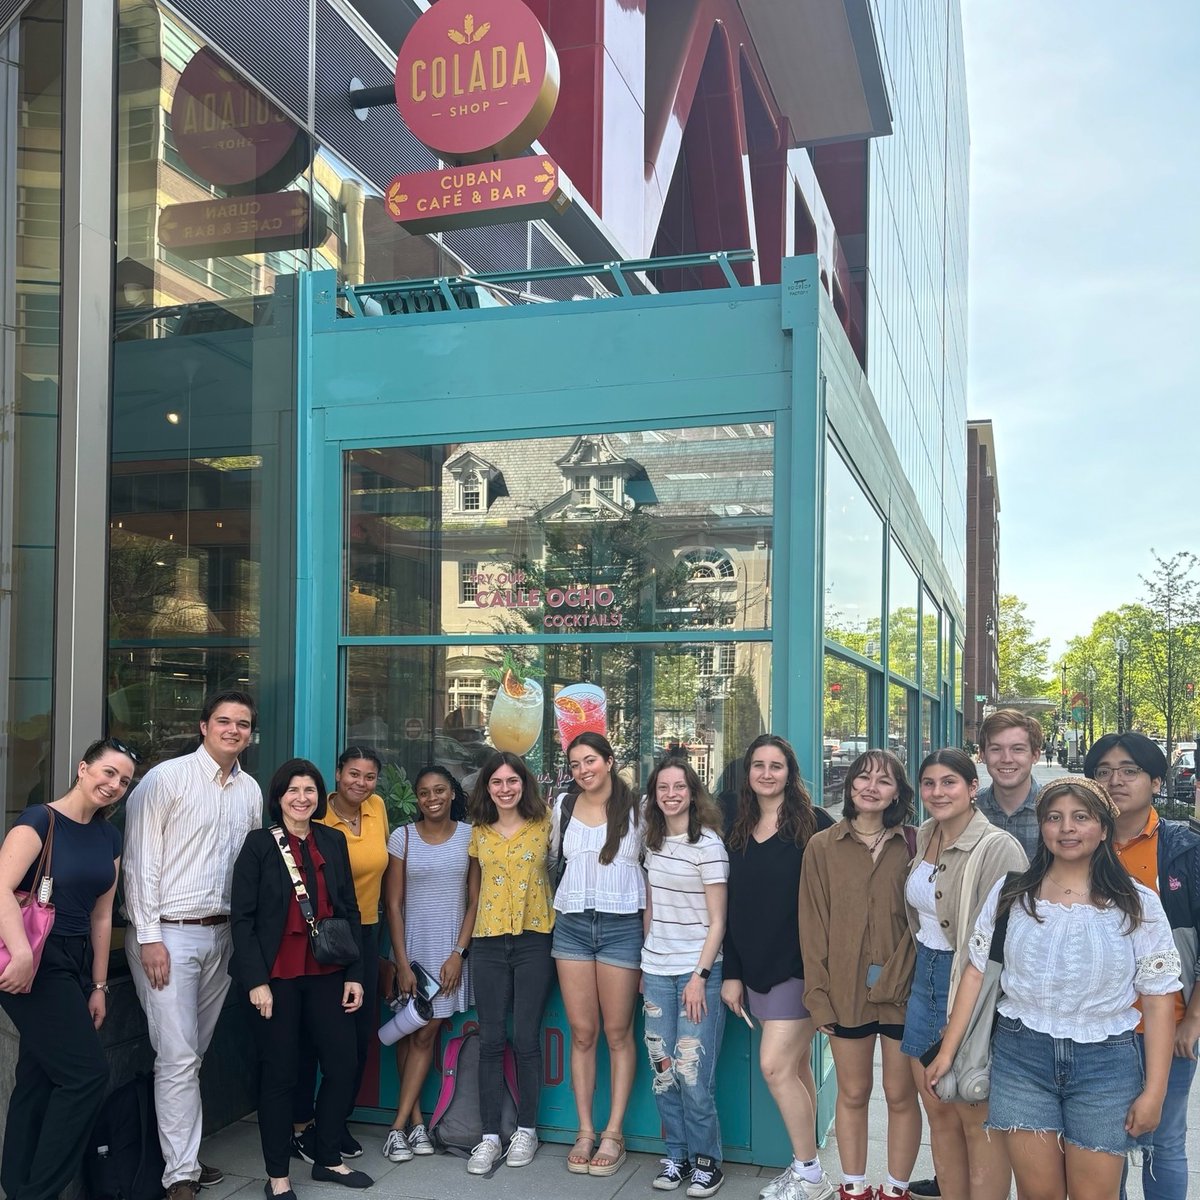 Thank you to #SineStudentAdvisors Meera Hajarnis, Cecilia Duncker, Julianna Caskie, Daniel Punales, Nicholas Adam, and Ethan Puc and all who joined us for #2024SineFellow Daniella Senior's events in MGC and @Coladashop this semester!